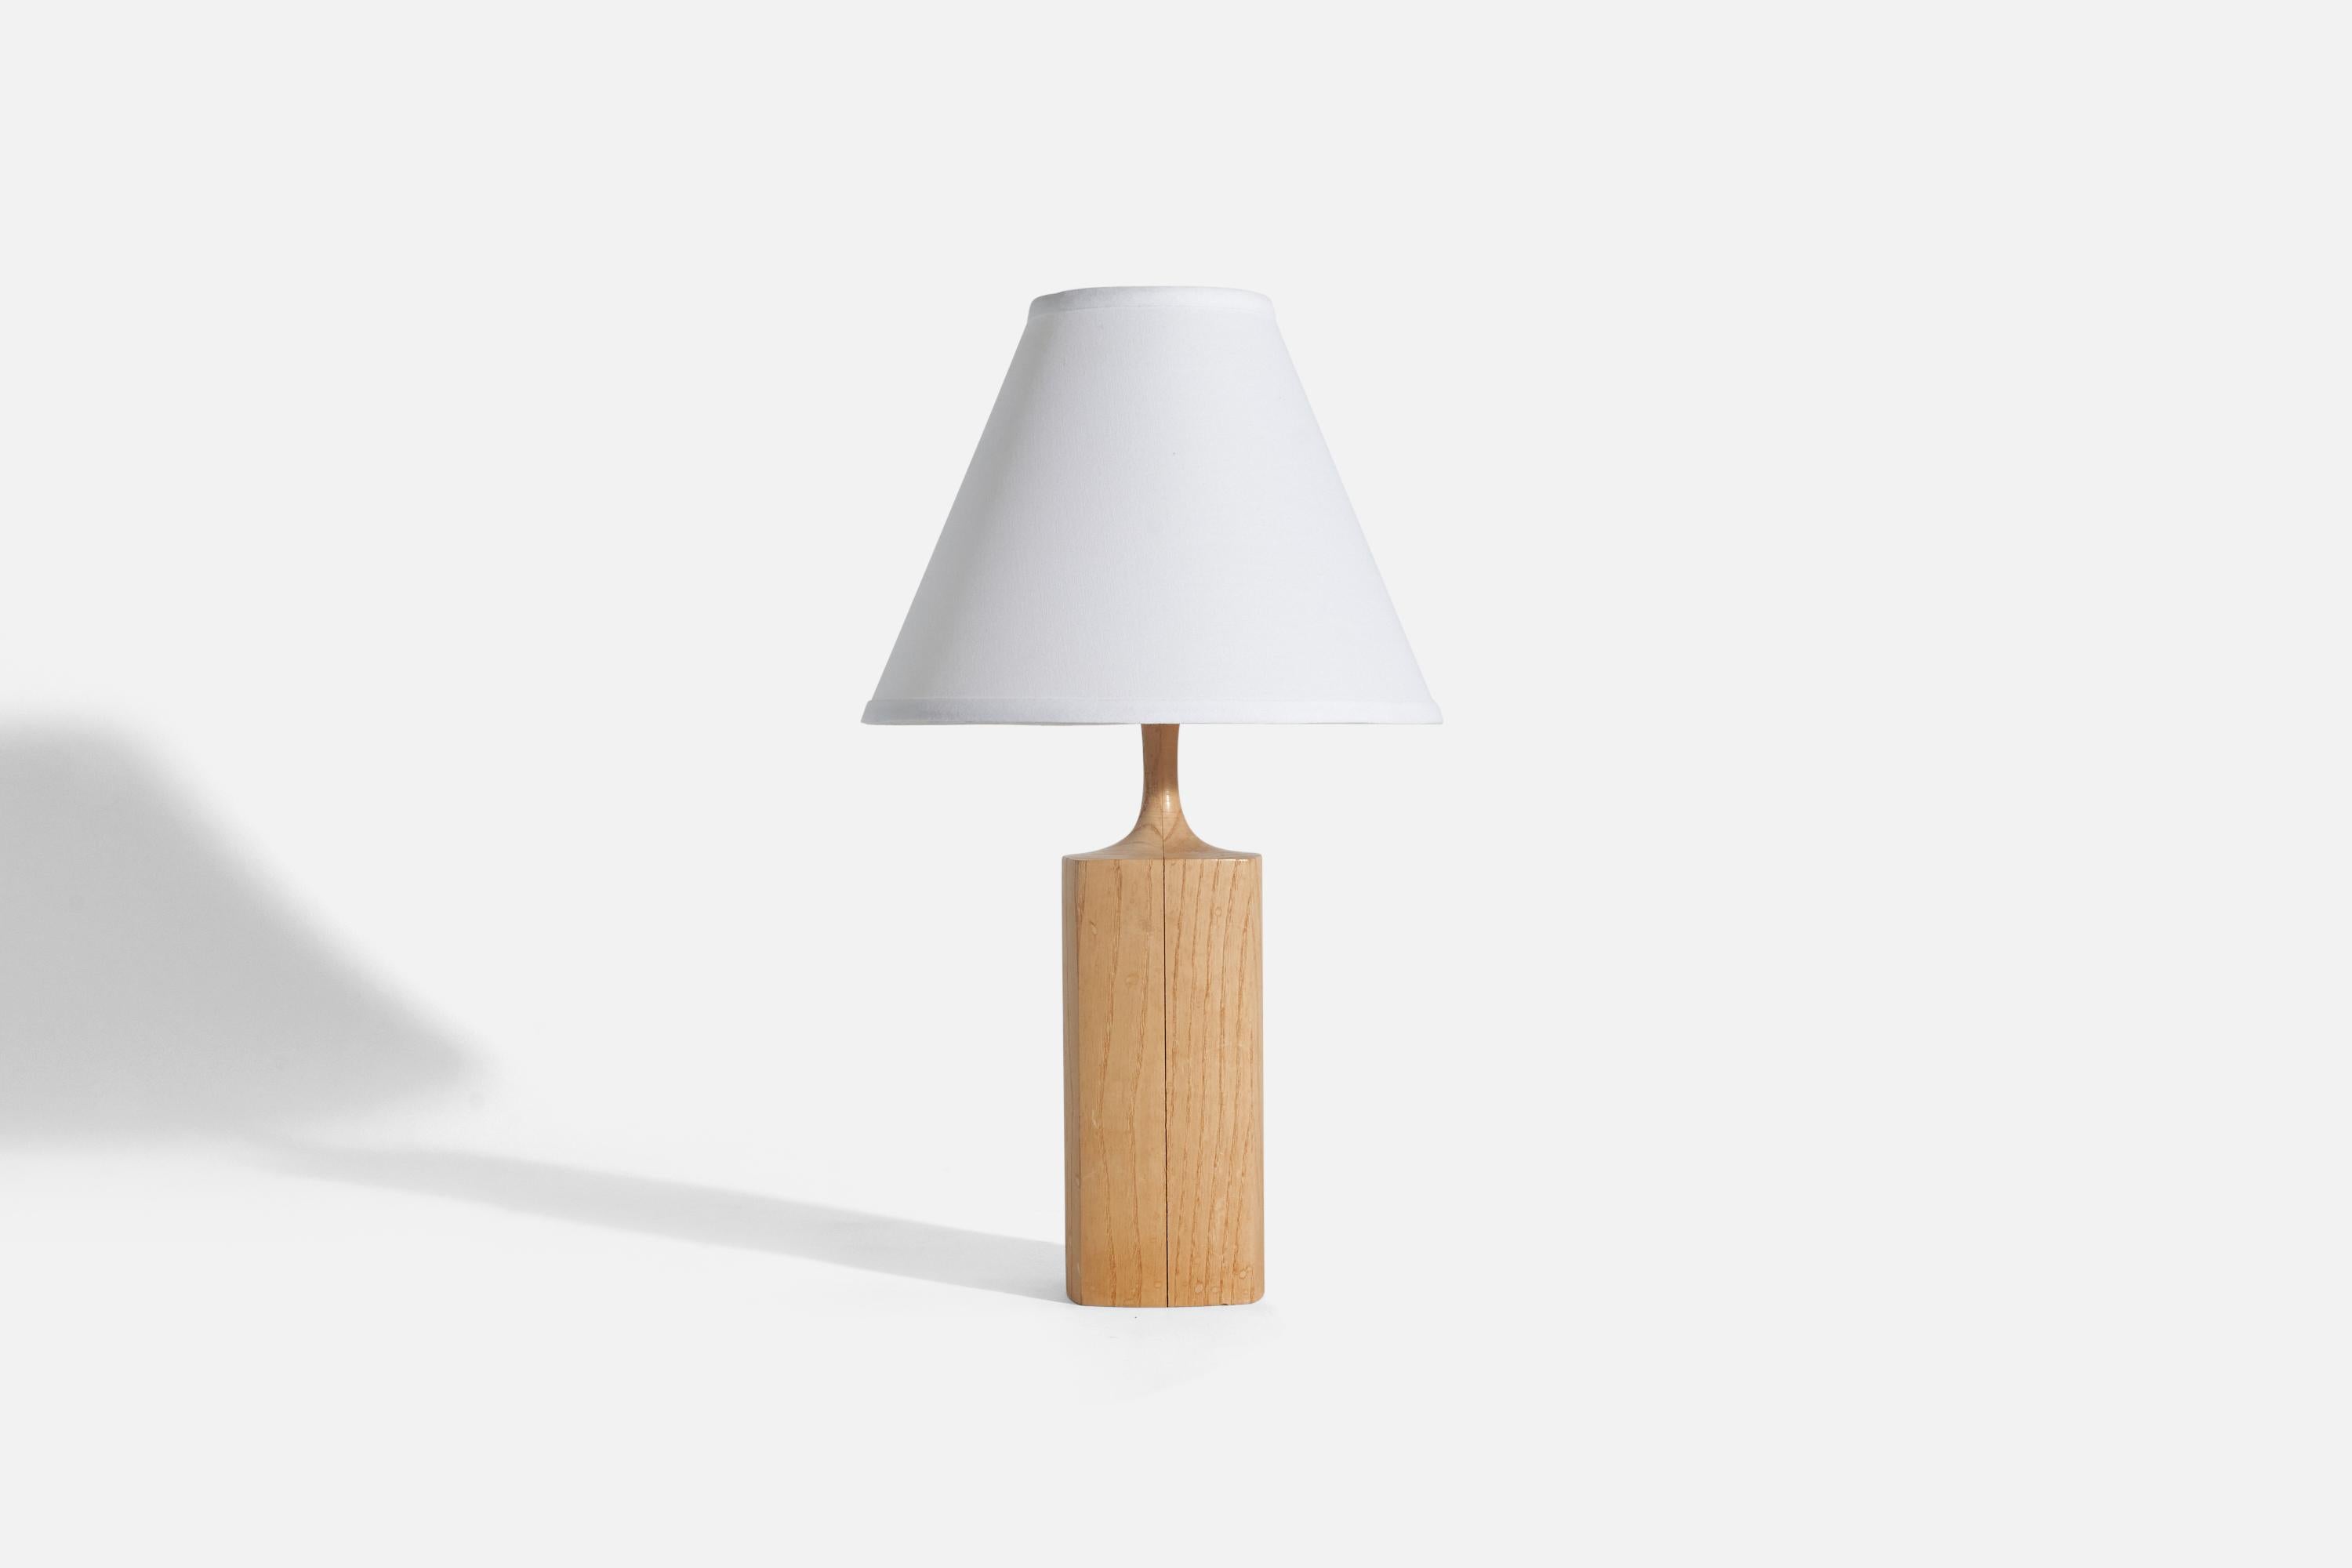 An oak table lamp designed and produced by Kjell Blomberg, Sweden, c. 1960s. 

Sold without Lampshade(s)
Dimensions of Lamp (inches) : 13.25 x 3.5 x 3.5 (Height x Width x Depth)
Dimensions of Shade (inches) : 4.25 x 10.25 x 8 (Top Diameter x Bottom